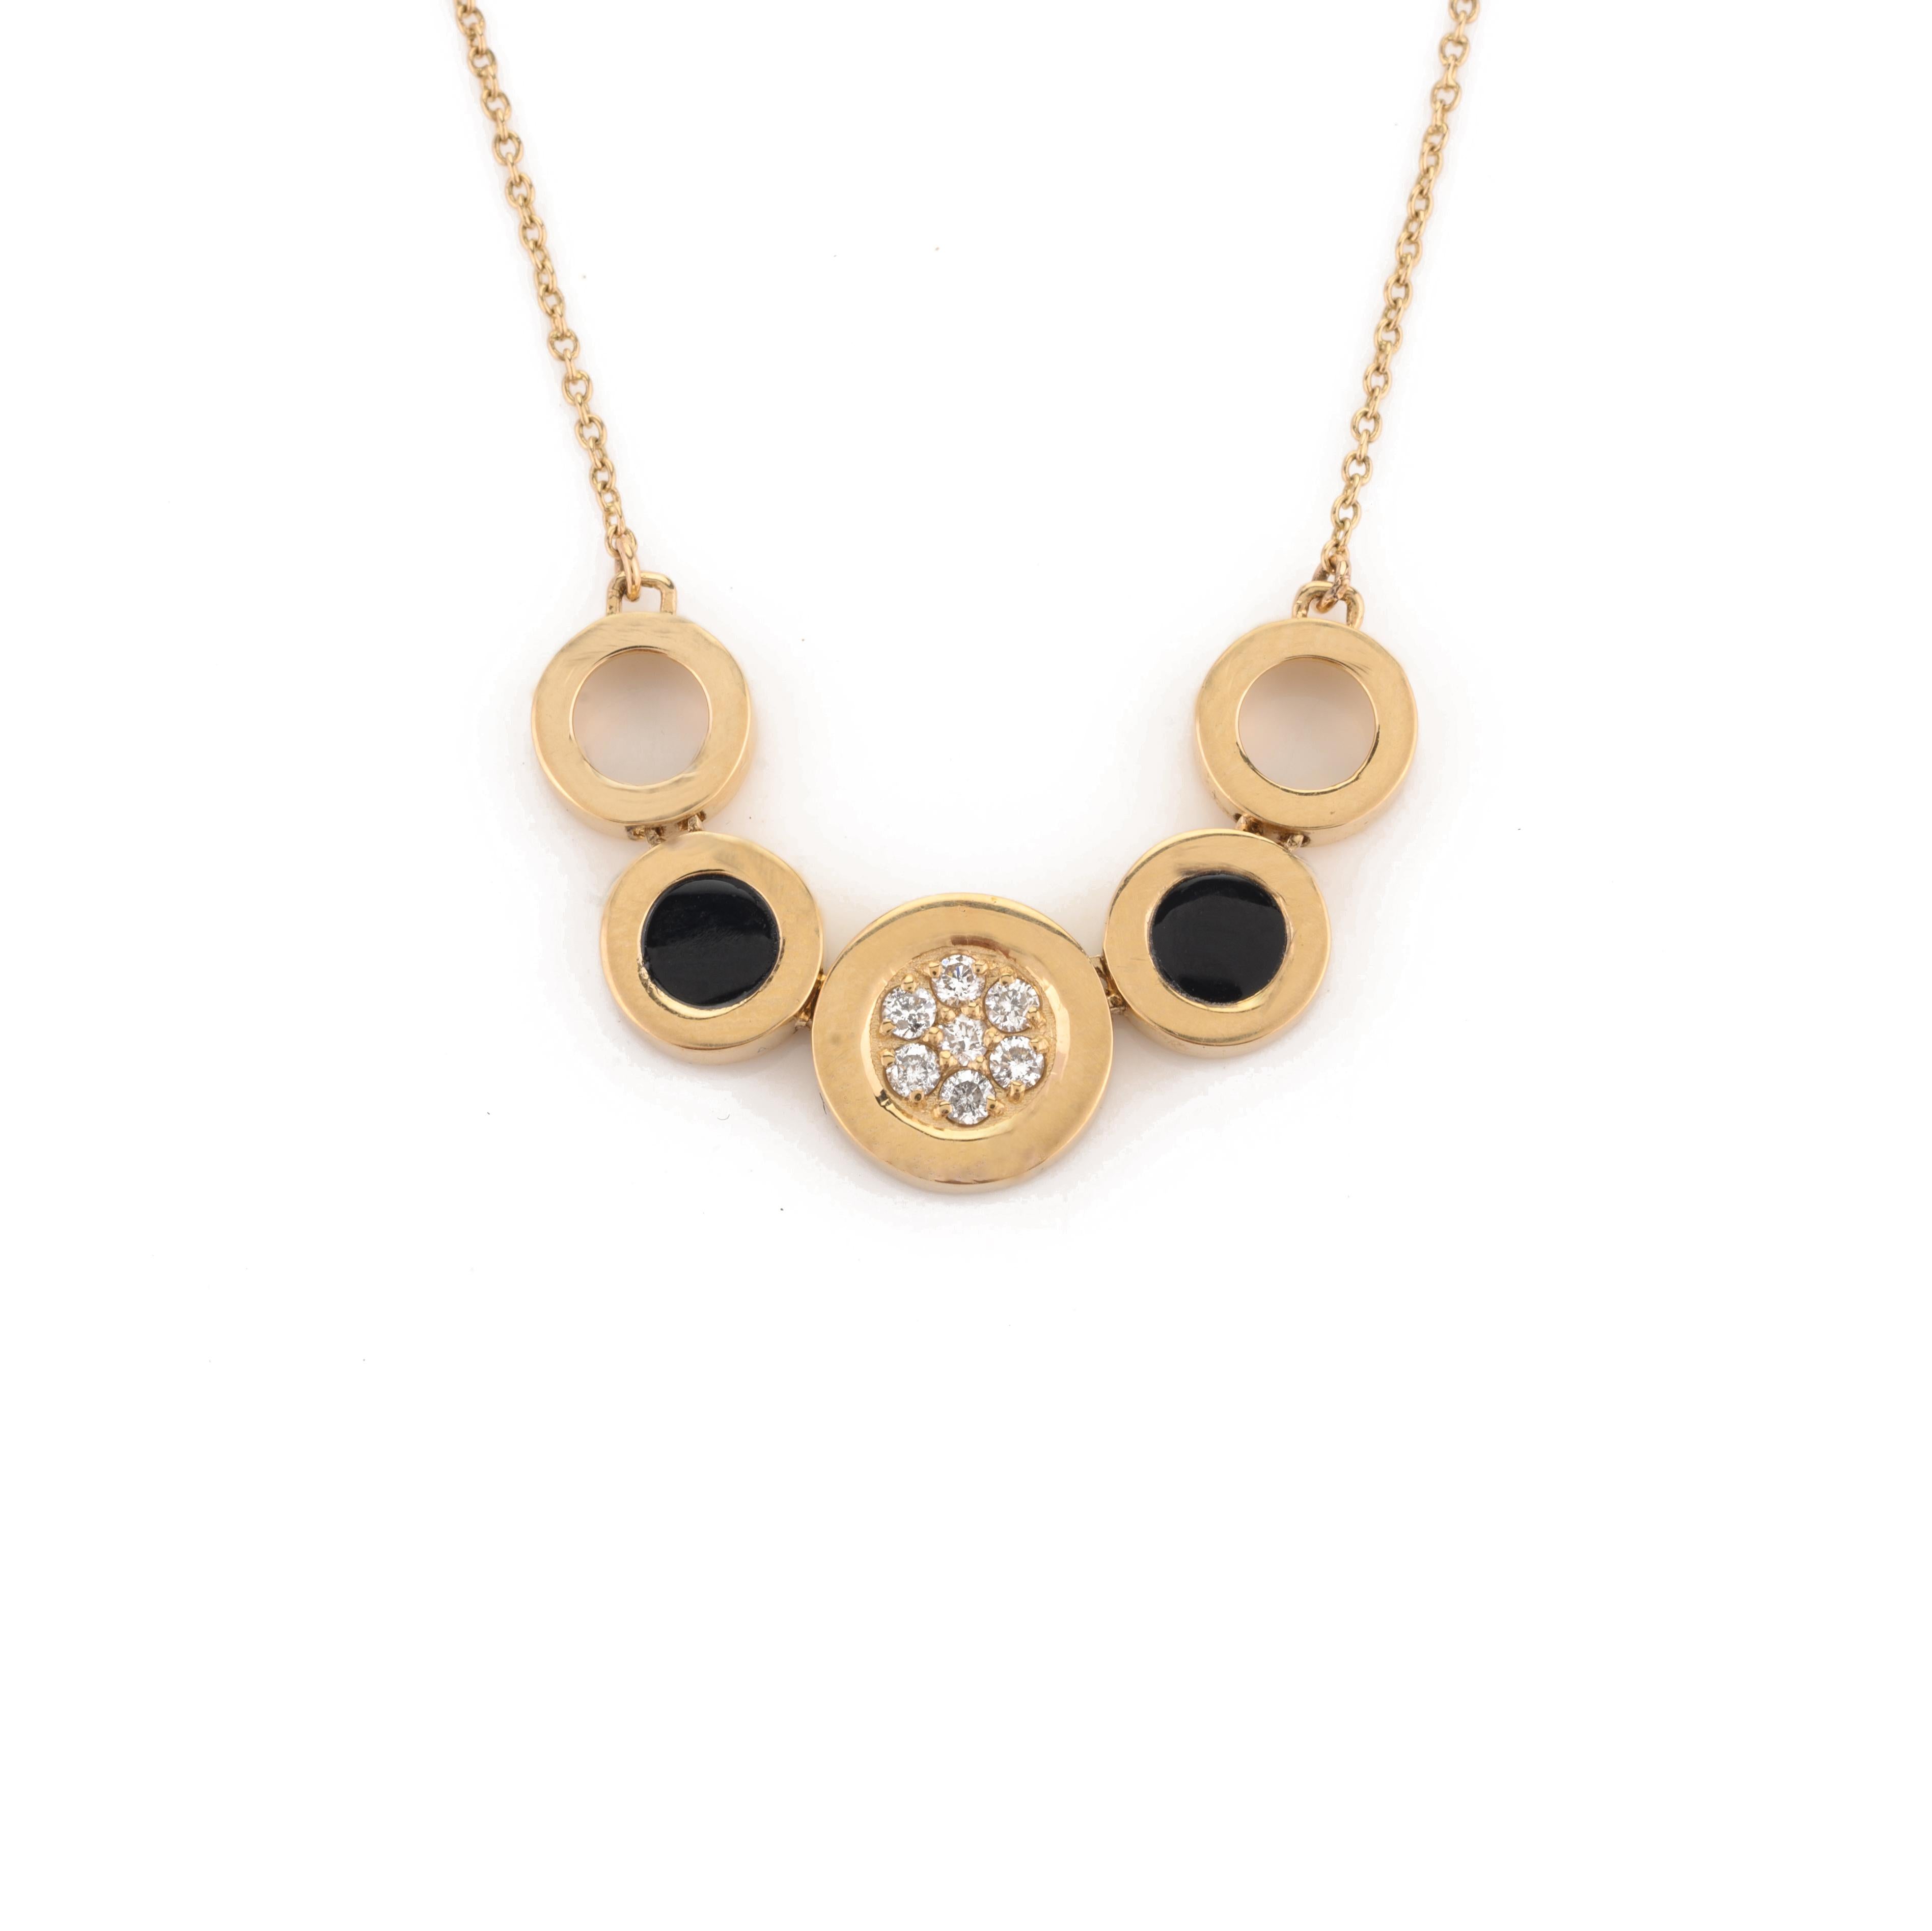 Unique Black Onyx and Diamond Chain Necklaces in 14k Solid Yellow Gold For Sale 1